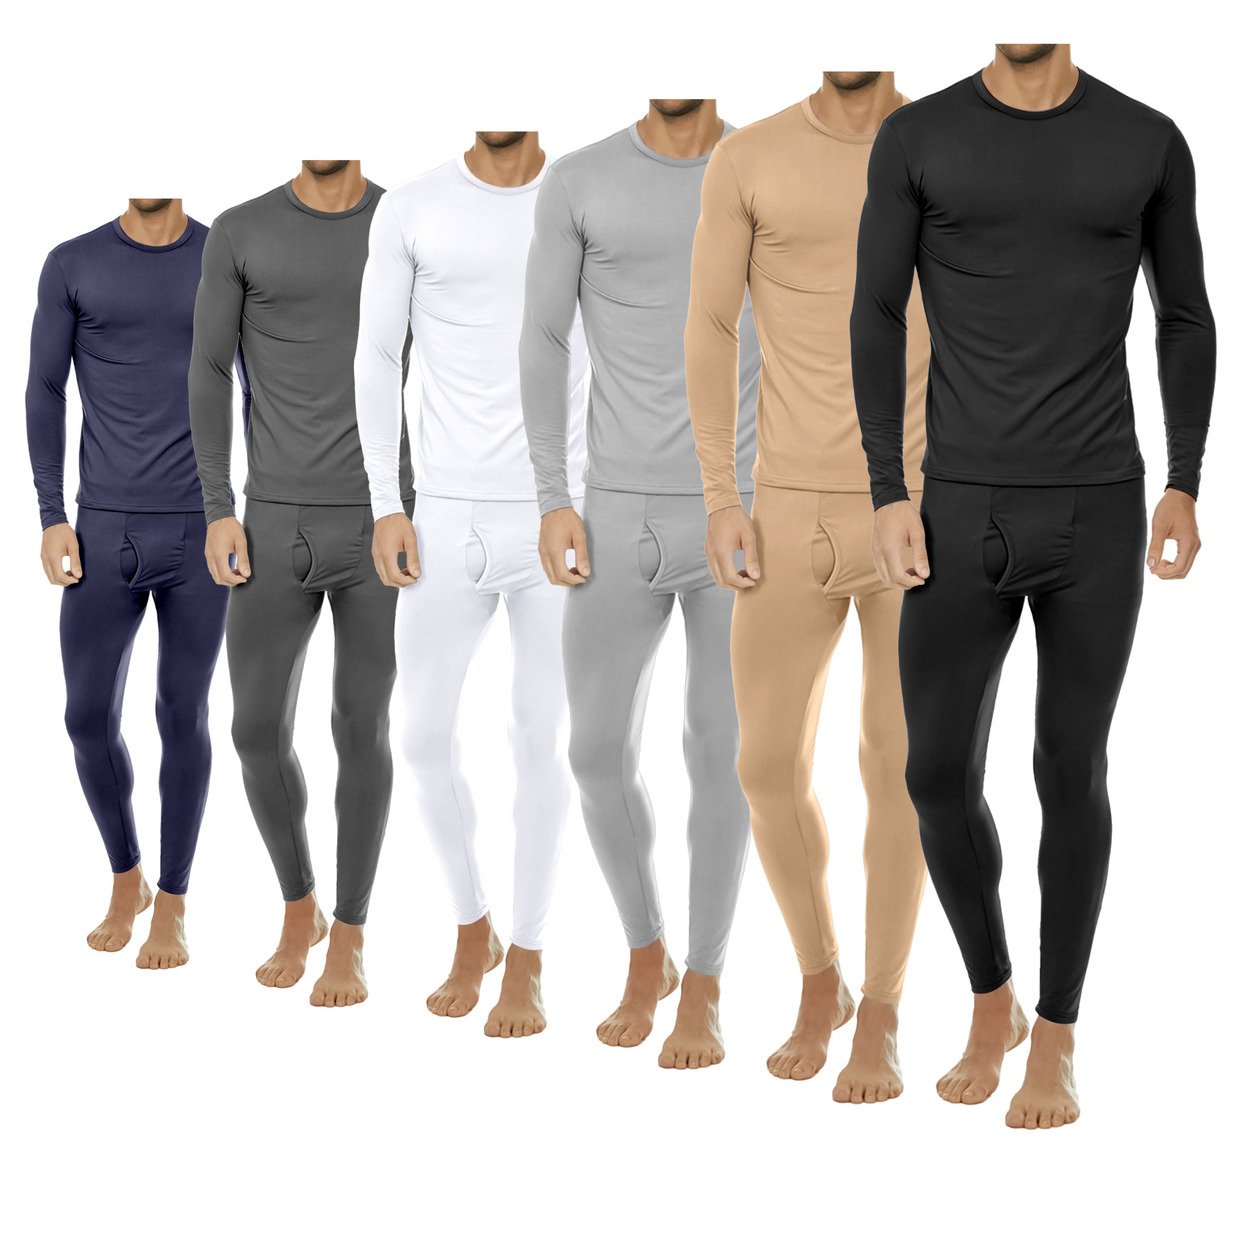 2-Sets: Men's Winter Warm Fleece Lined Thermal Underwear Set For Cold Weather - White&navy, Xx-large